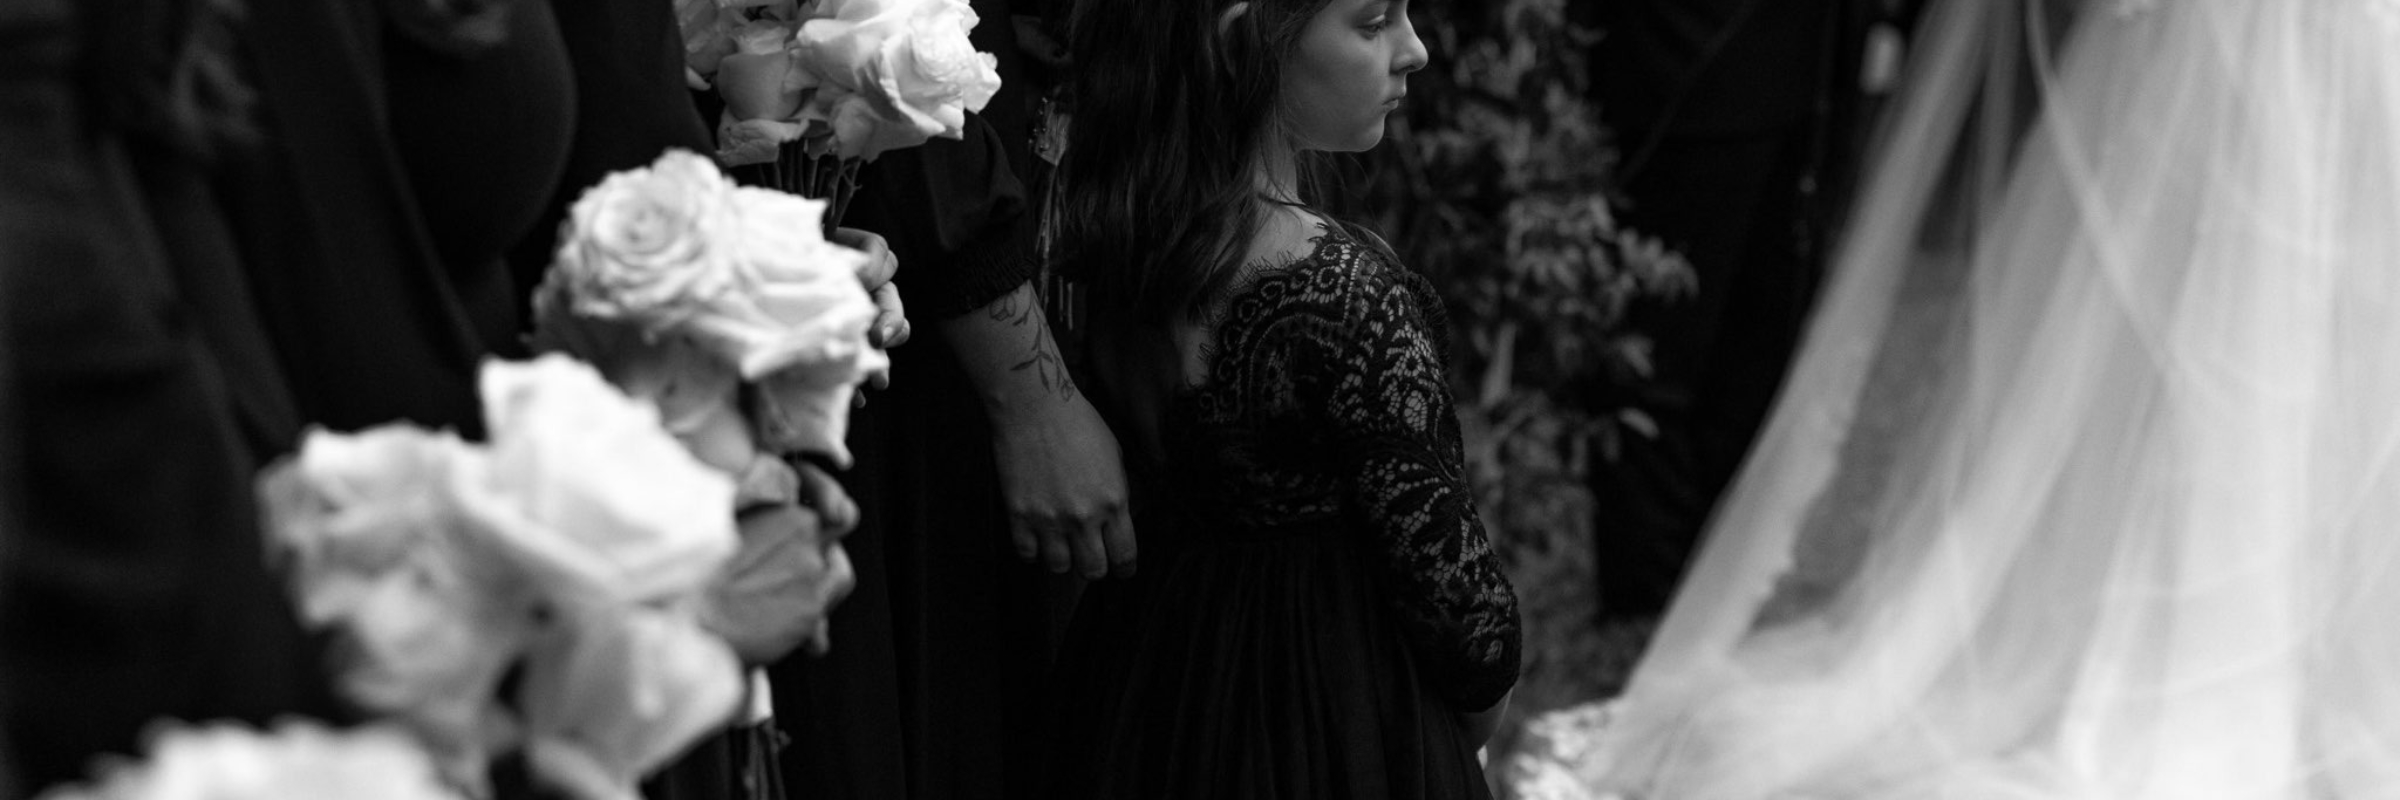 obx wedding flowers black and white with flowers and girl